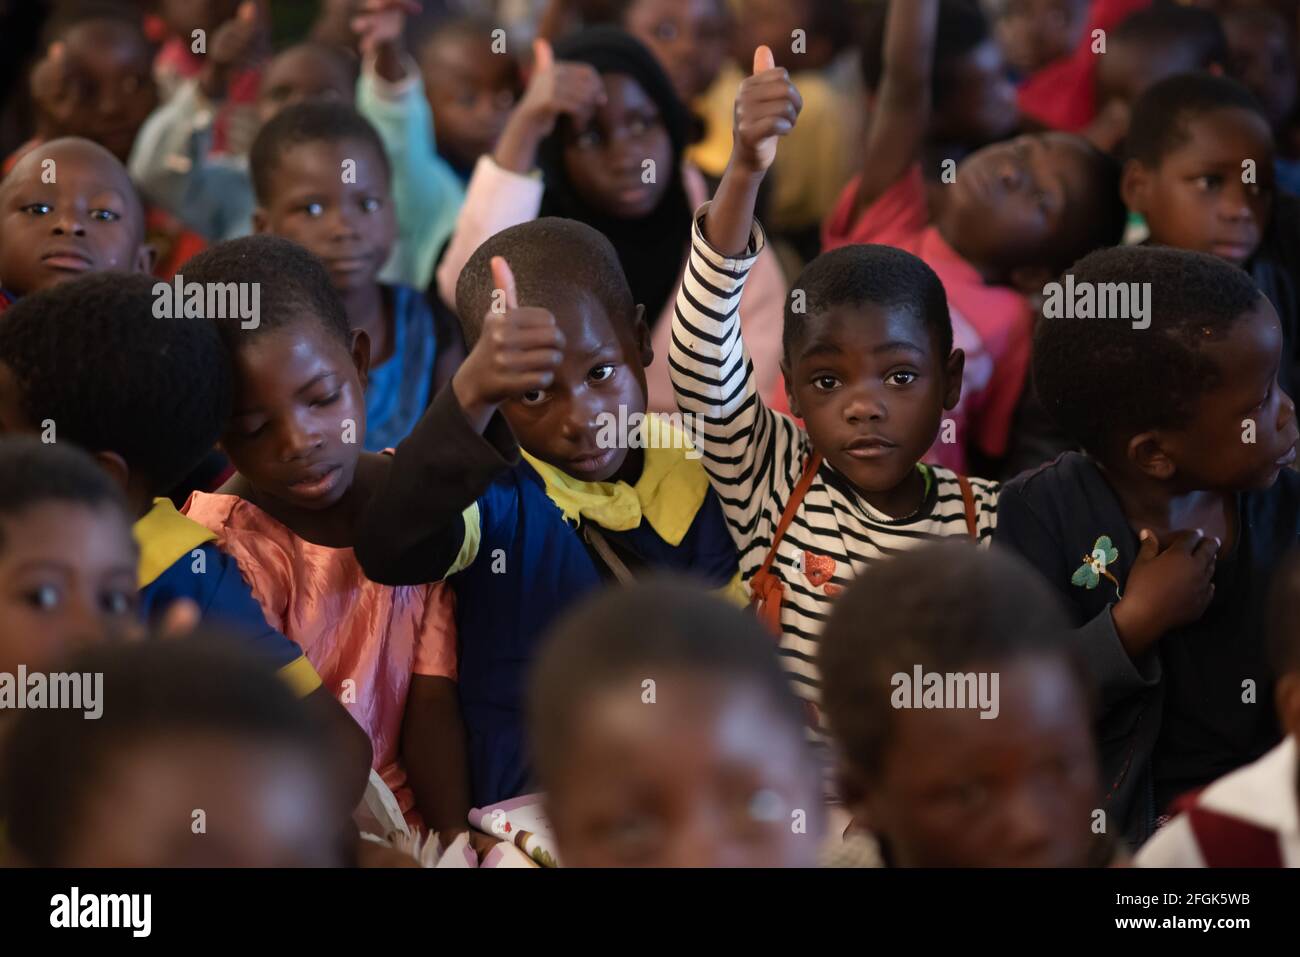 Mzuzu, Malawi. 30-05-2018. Afro-descendent children attending classes at a rural school in Malawi showing a thumps up toi their teacher. Stock Photo